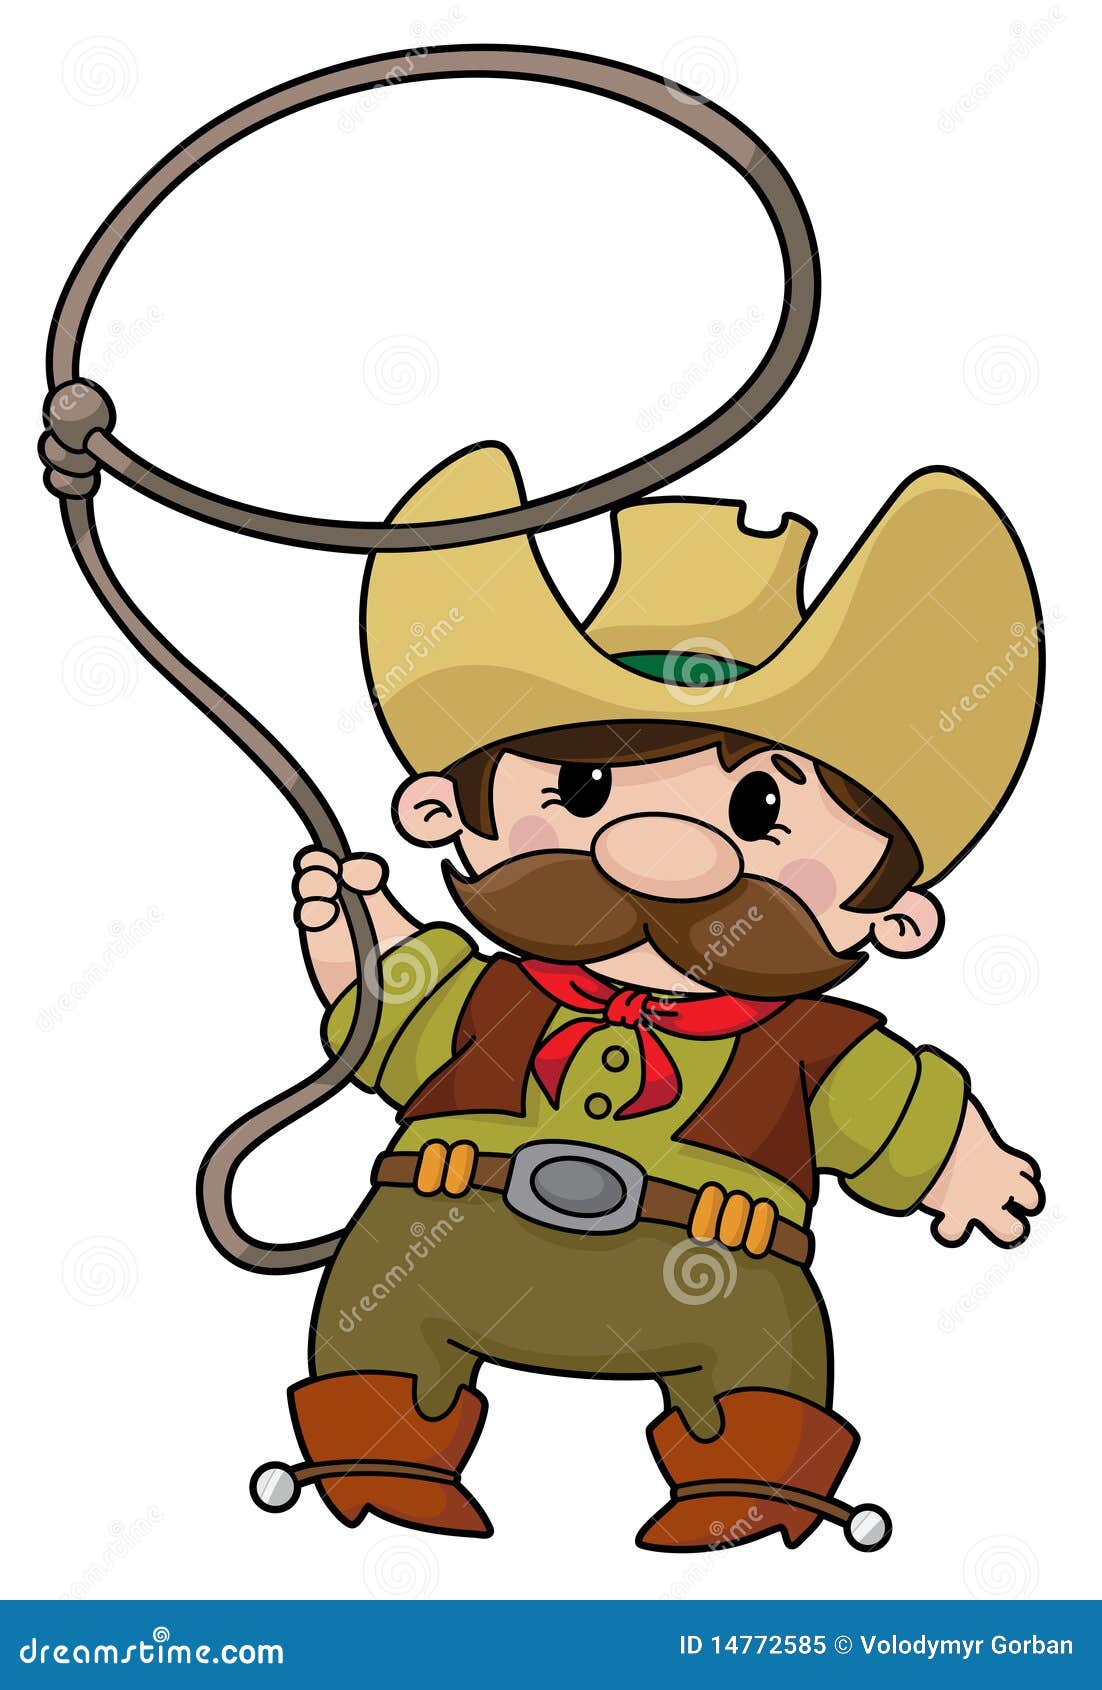 Cowboy with lasso stock vector. Illustration of legend - 14772585